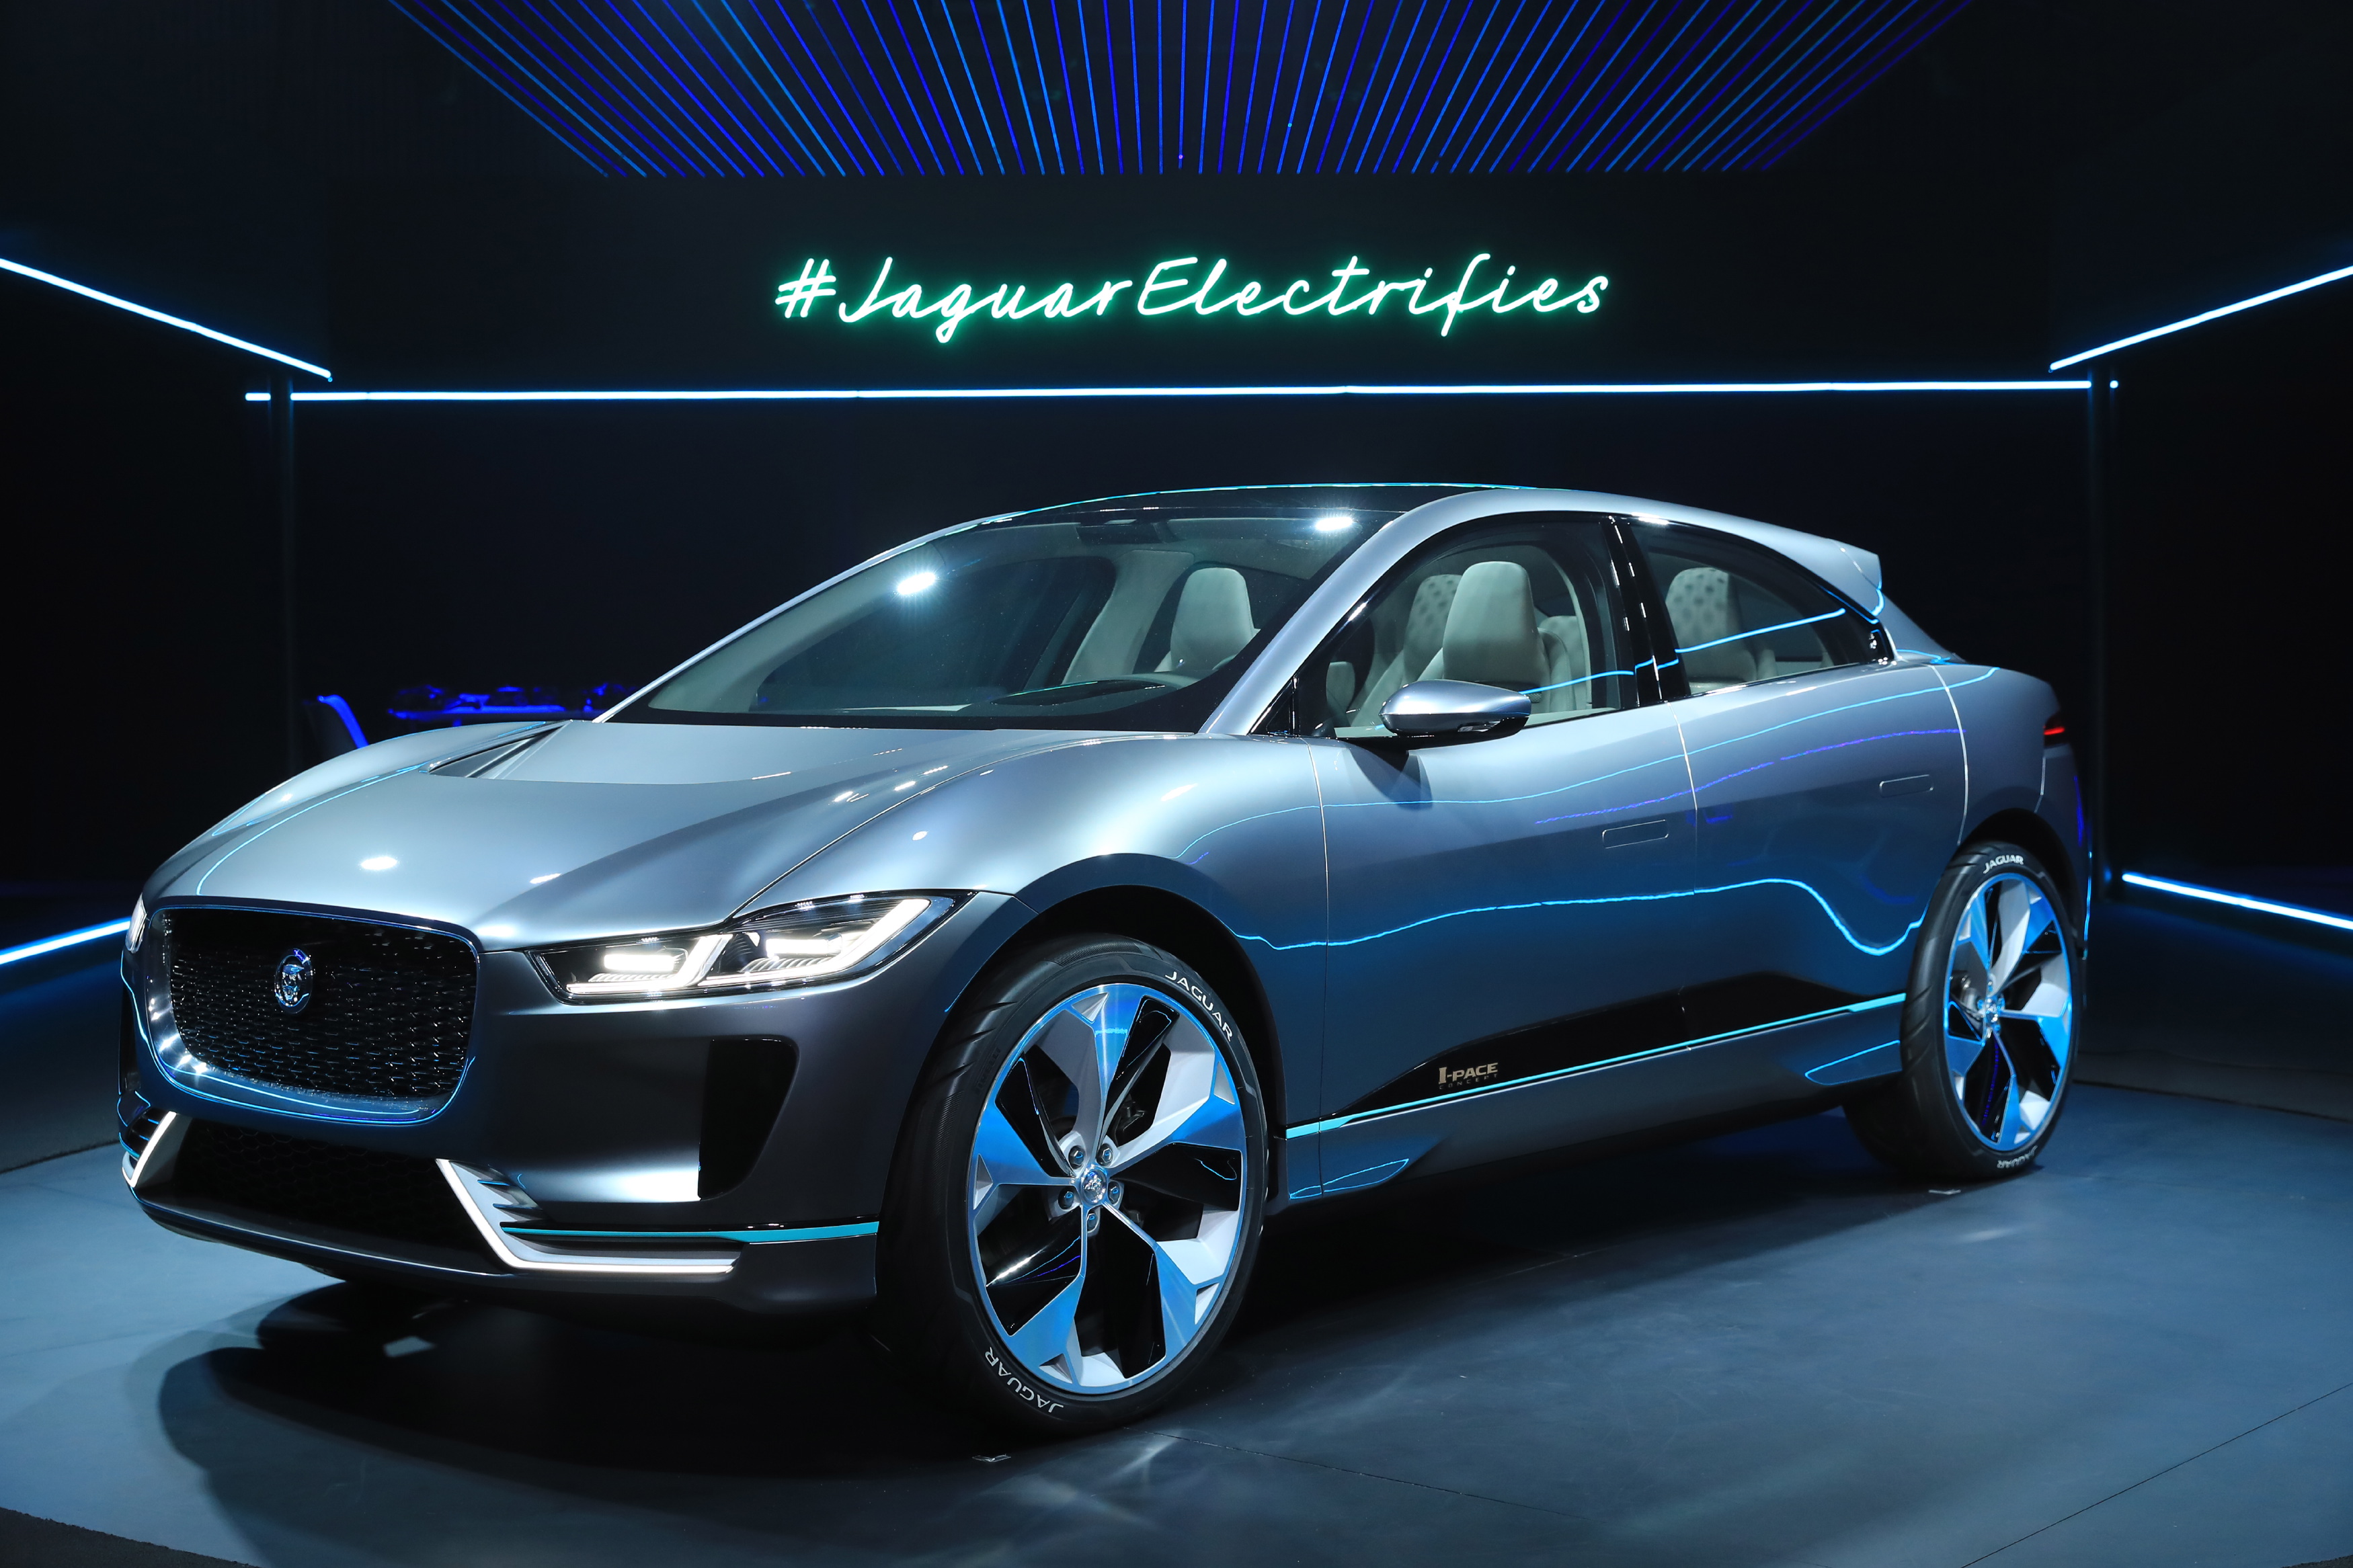 400-hp I-PACE EV just the beginning for Jaguar’s future